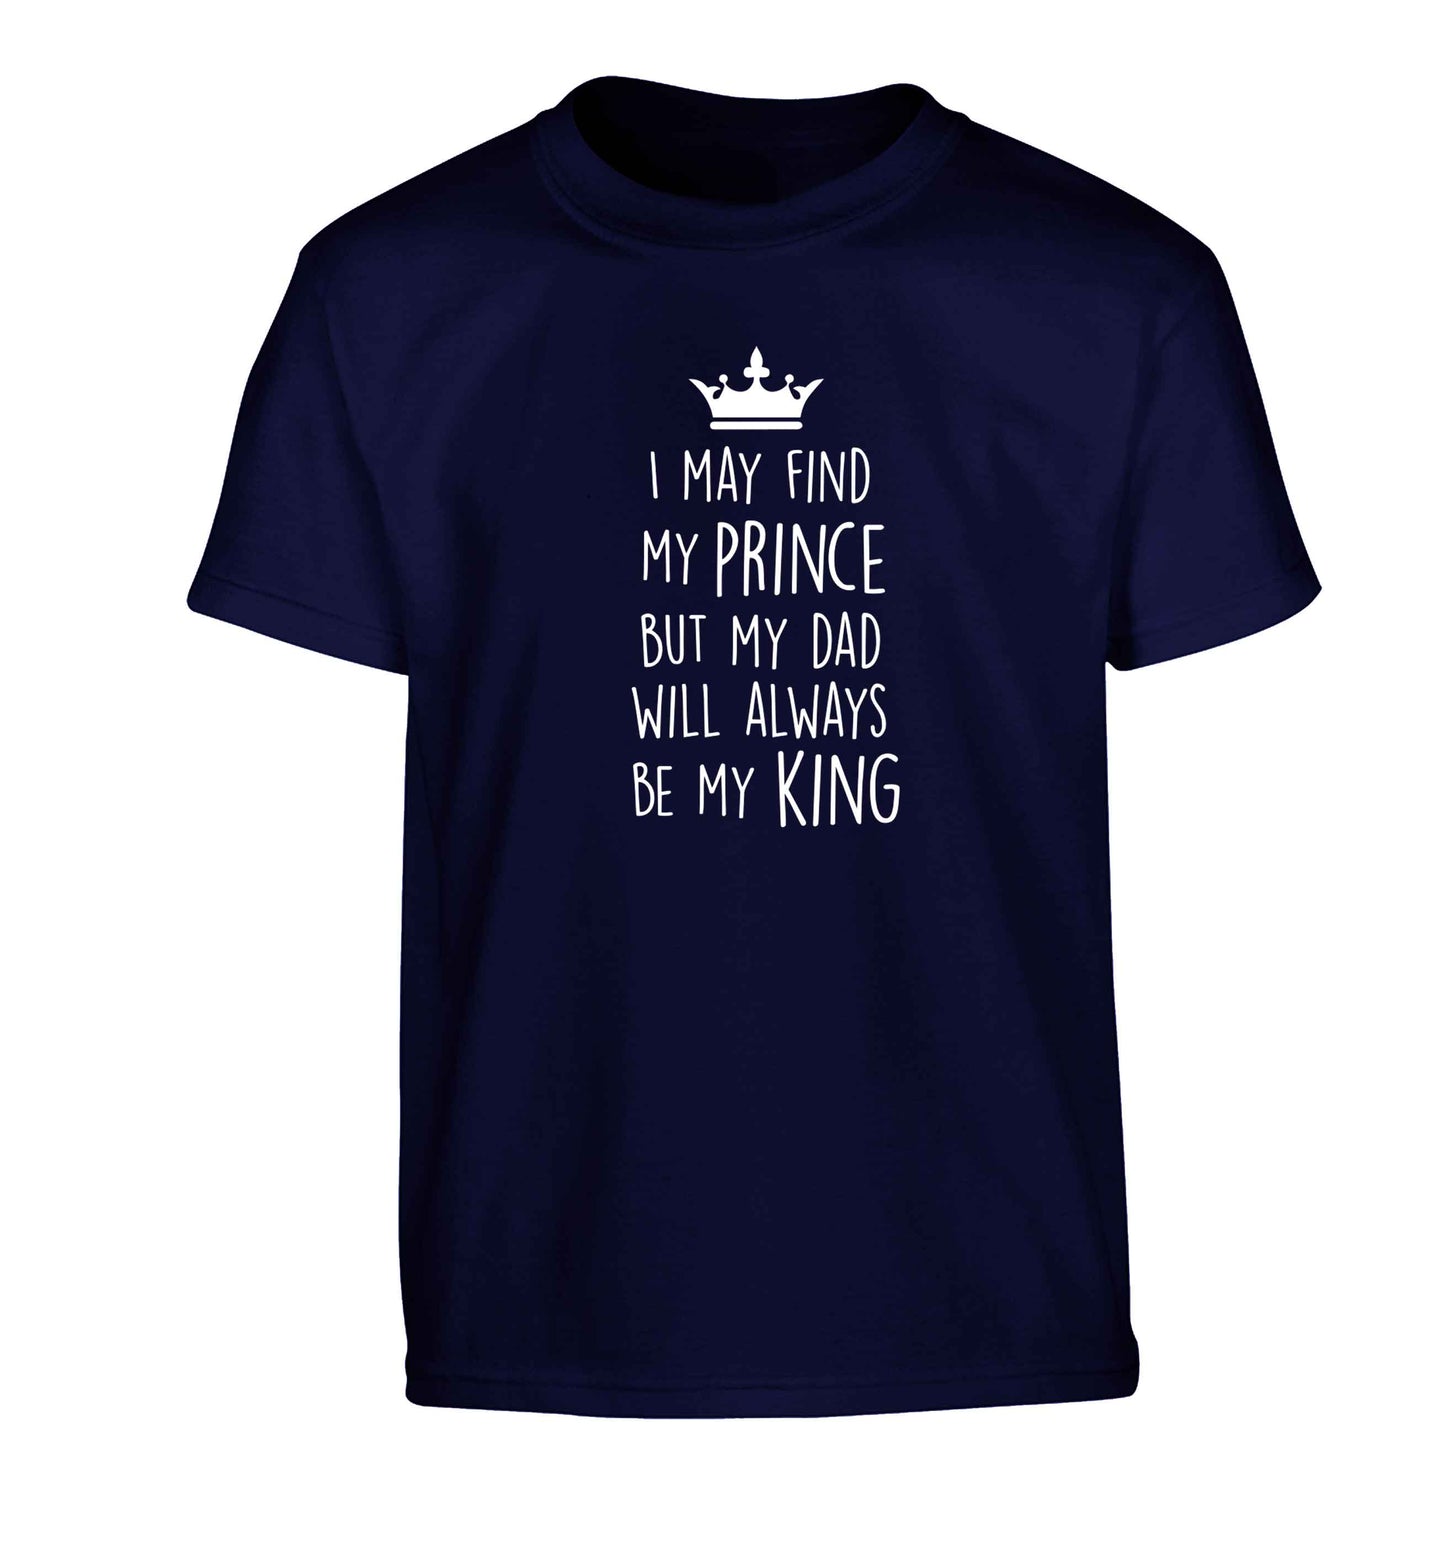 I may find my prince but my dad will always be my king Children's navy Tshirt 12-13 Years